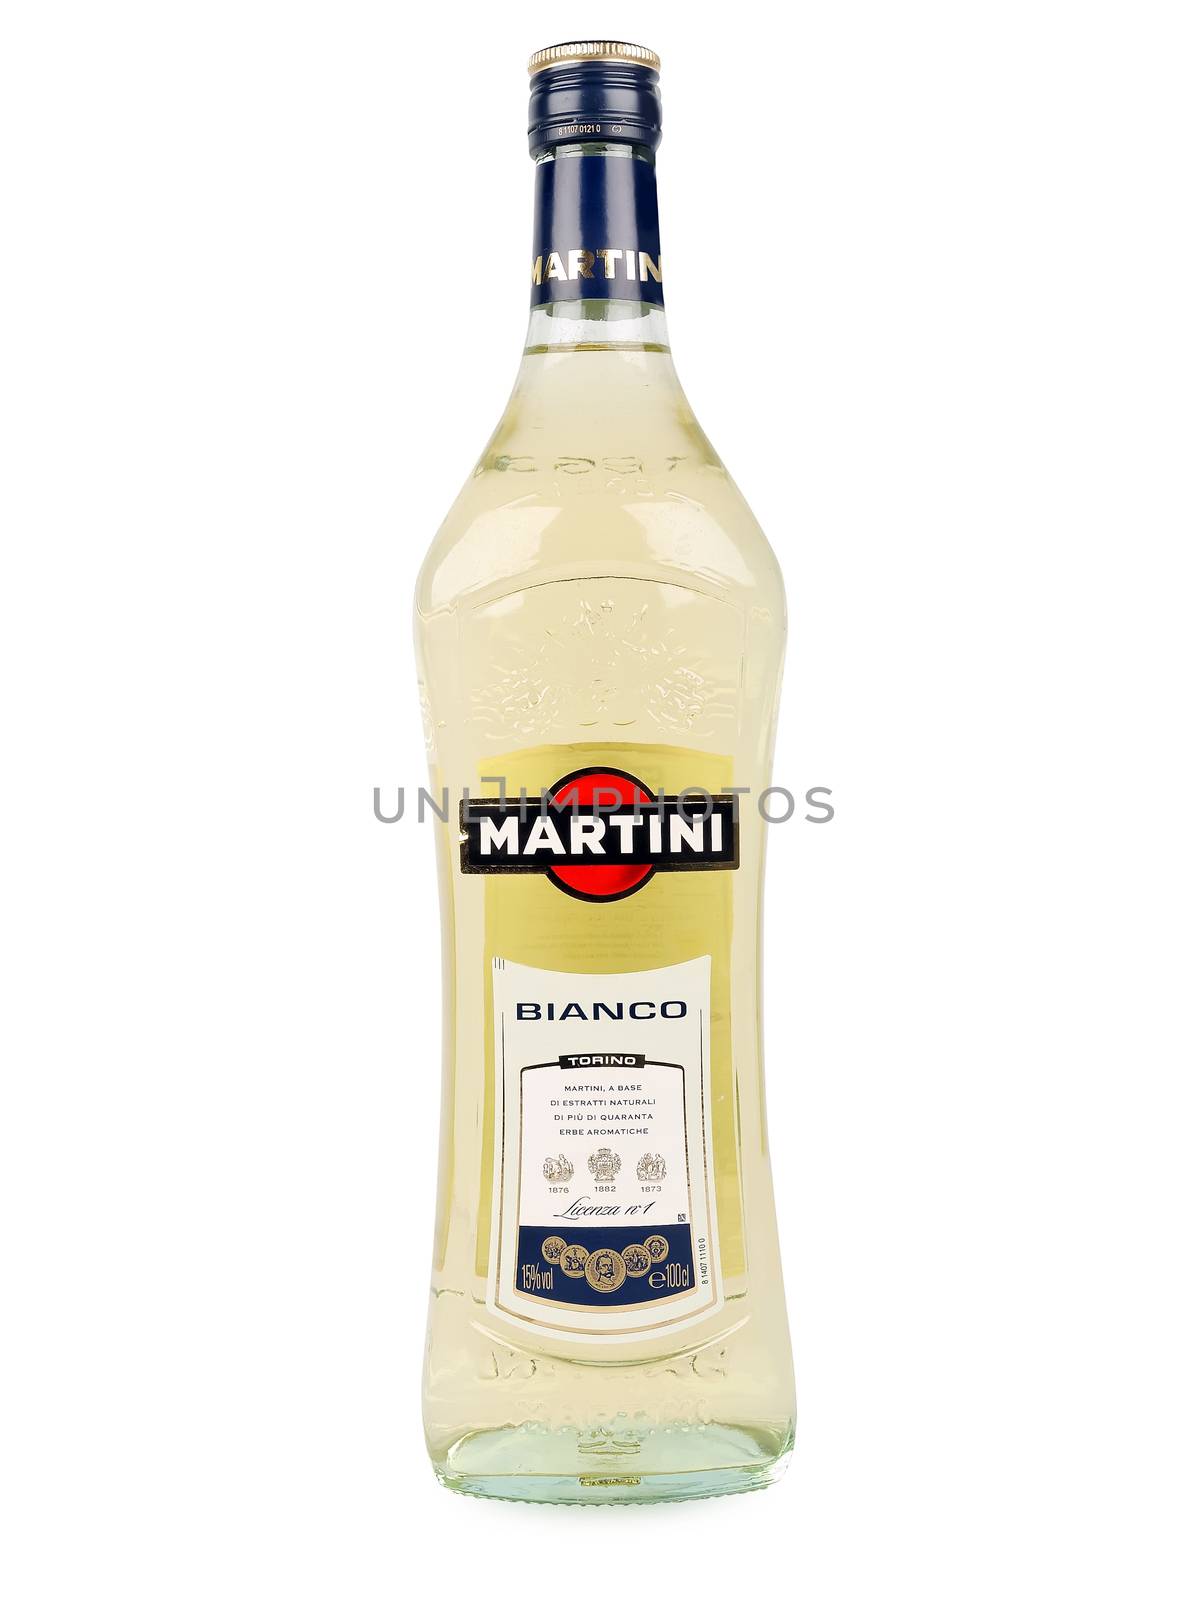 PULA, CROATIA - NOVEMBER 10, 2015: Martini a famous Italian vermouth is the world's fourth most powerful alcoholic brand produced in Torino by Martini and Rossi since 1863      